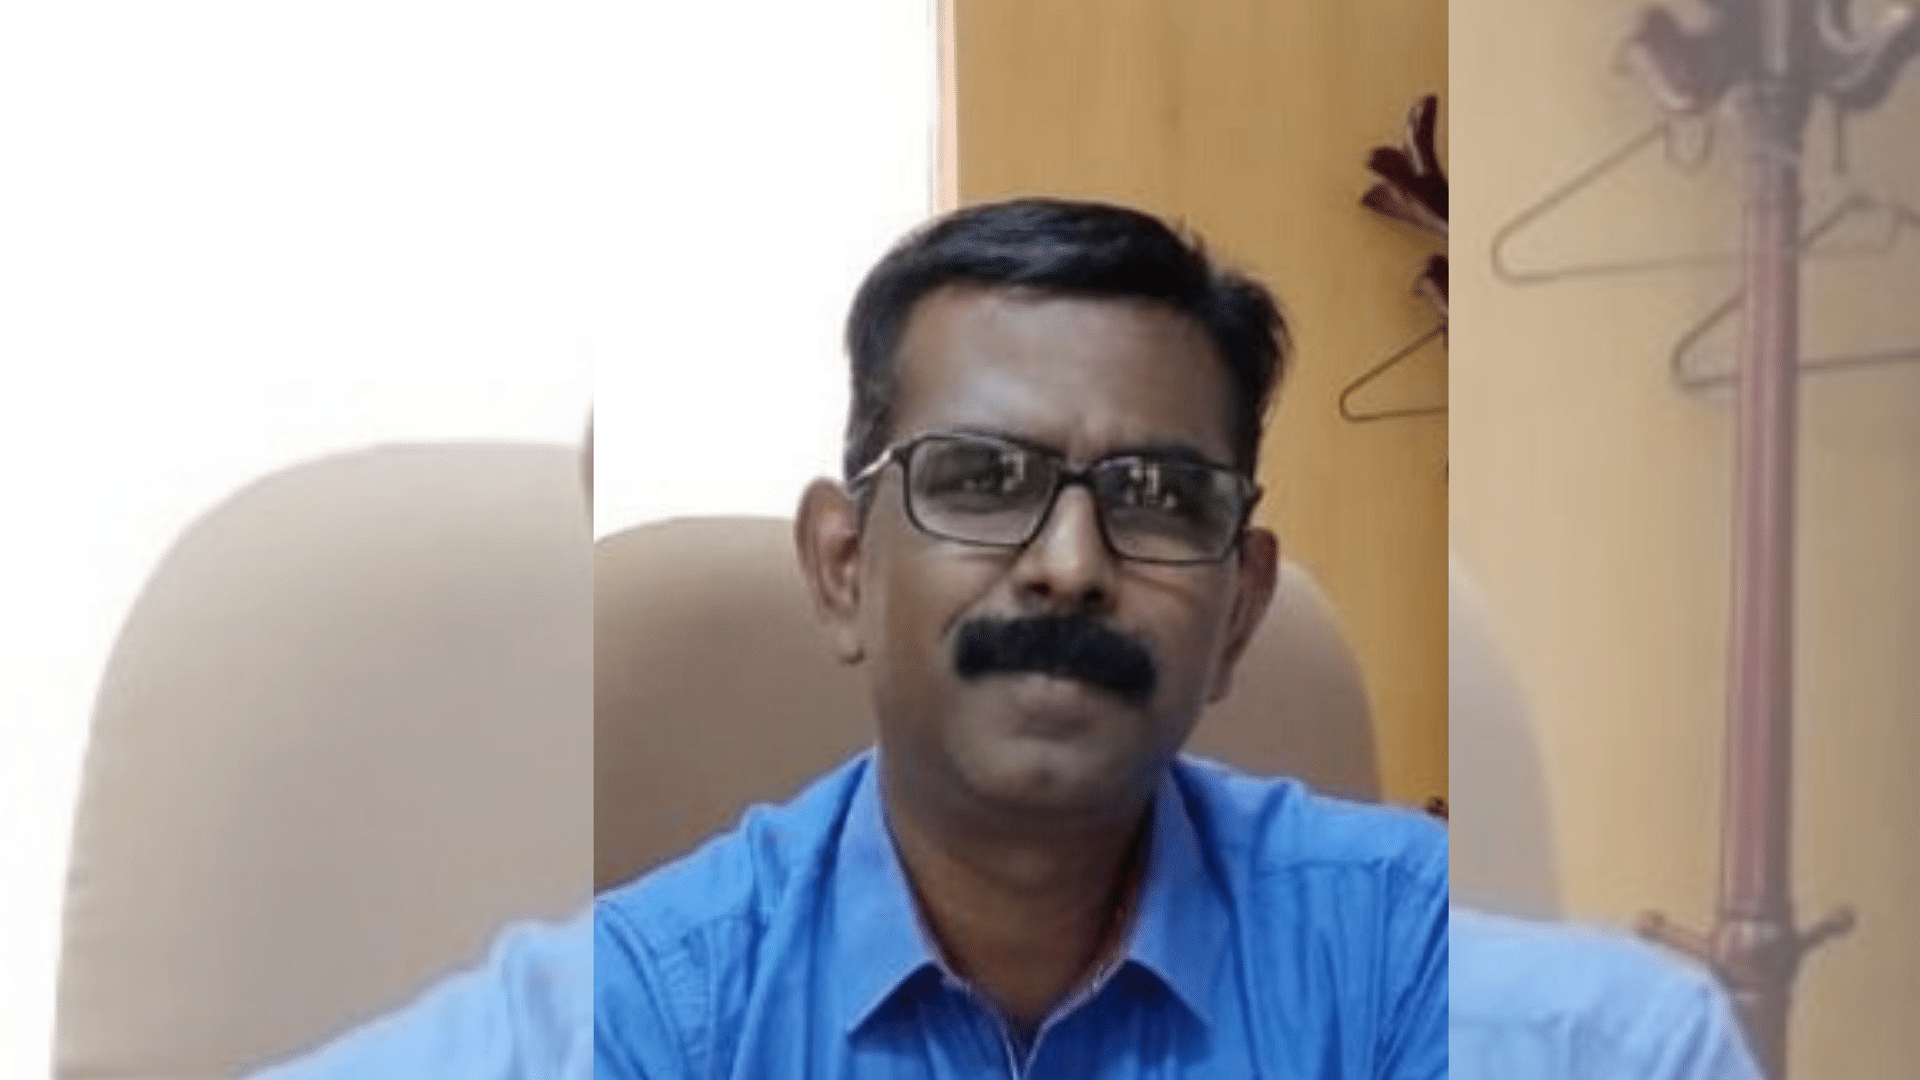 Capt Manivannan IAS Pushed out – Industry Pressure or Allegations?